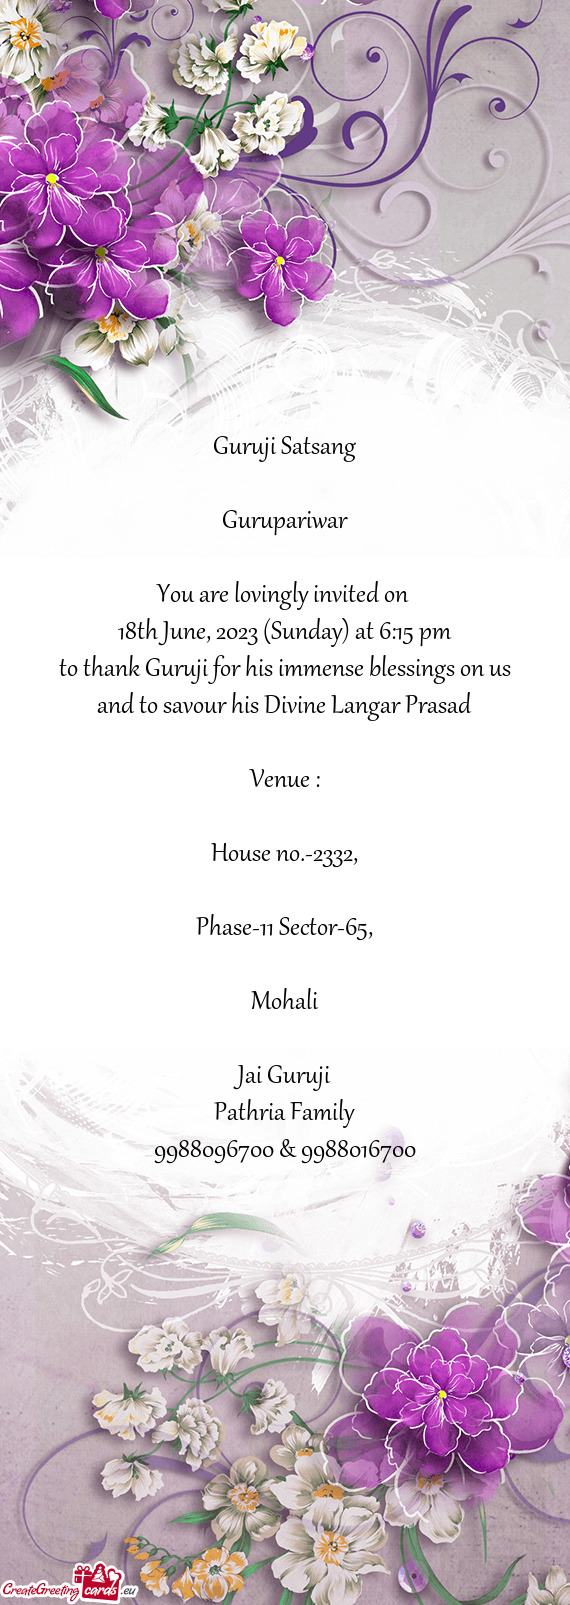 18th June, 2023 (Sunday) at 6:15 pm